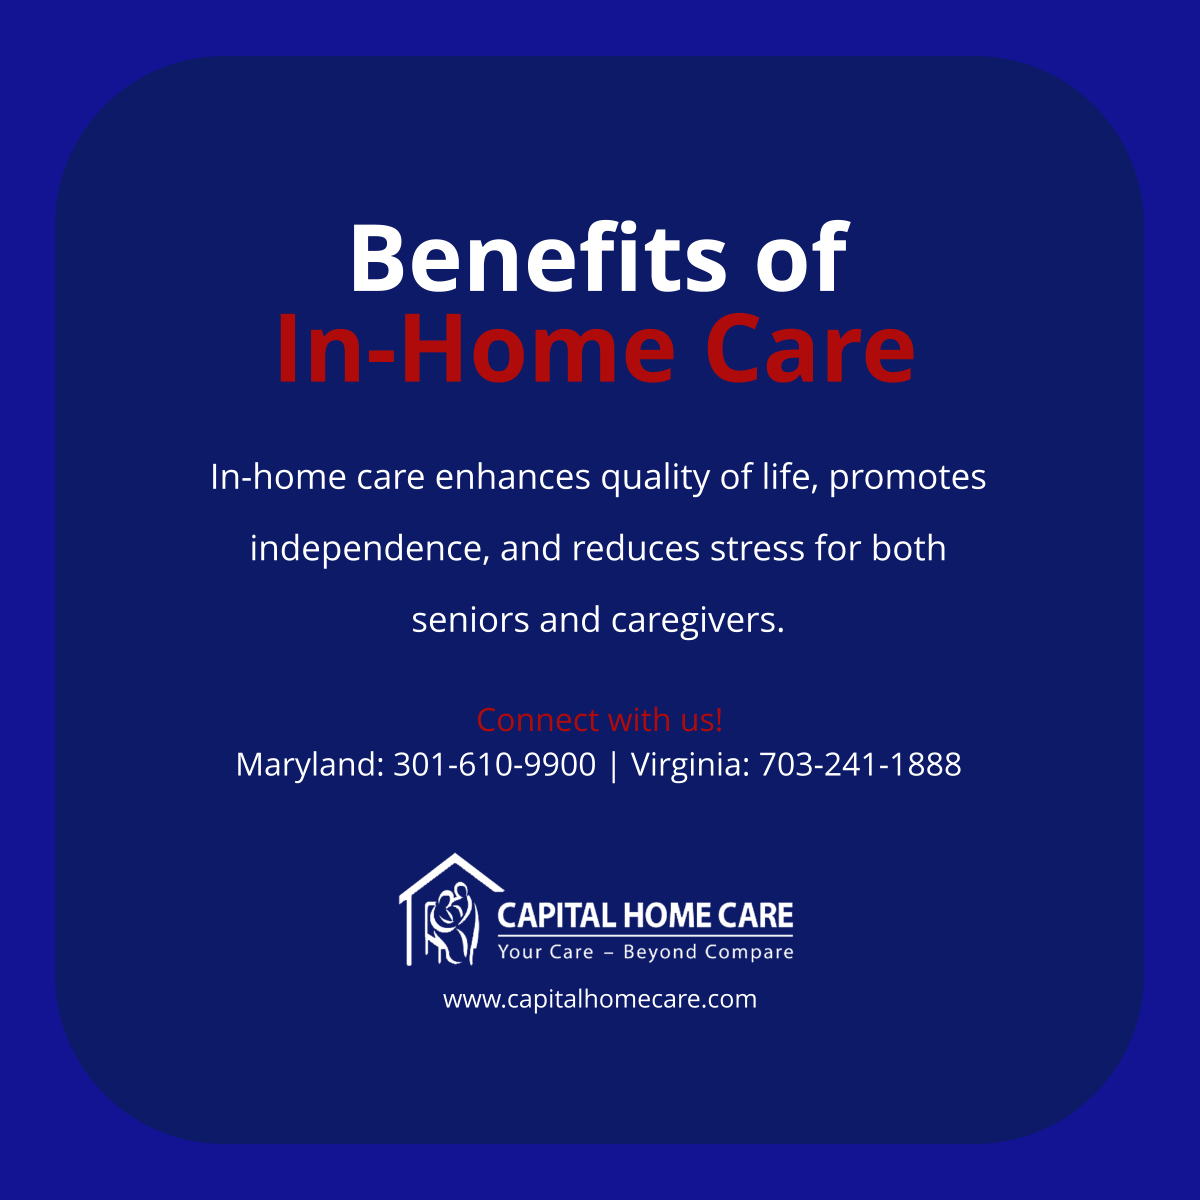 Did you know in-home care offers numerous benefits for seniors and caregivers alike? Learn more about how it can help. 

#RockvilleMD #HomeCare #SeniorWellness